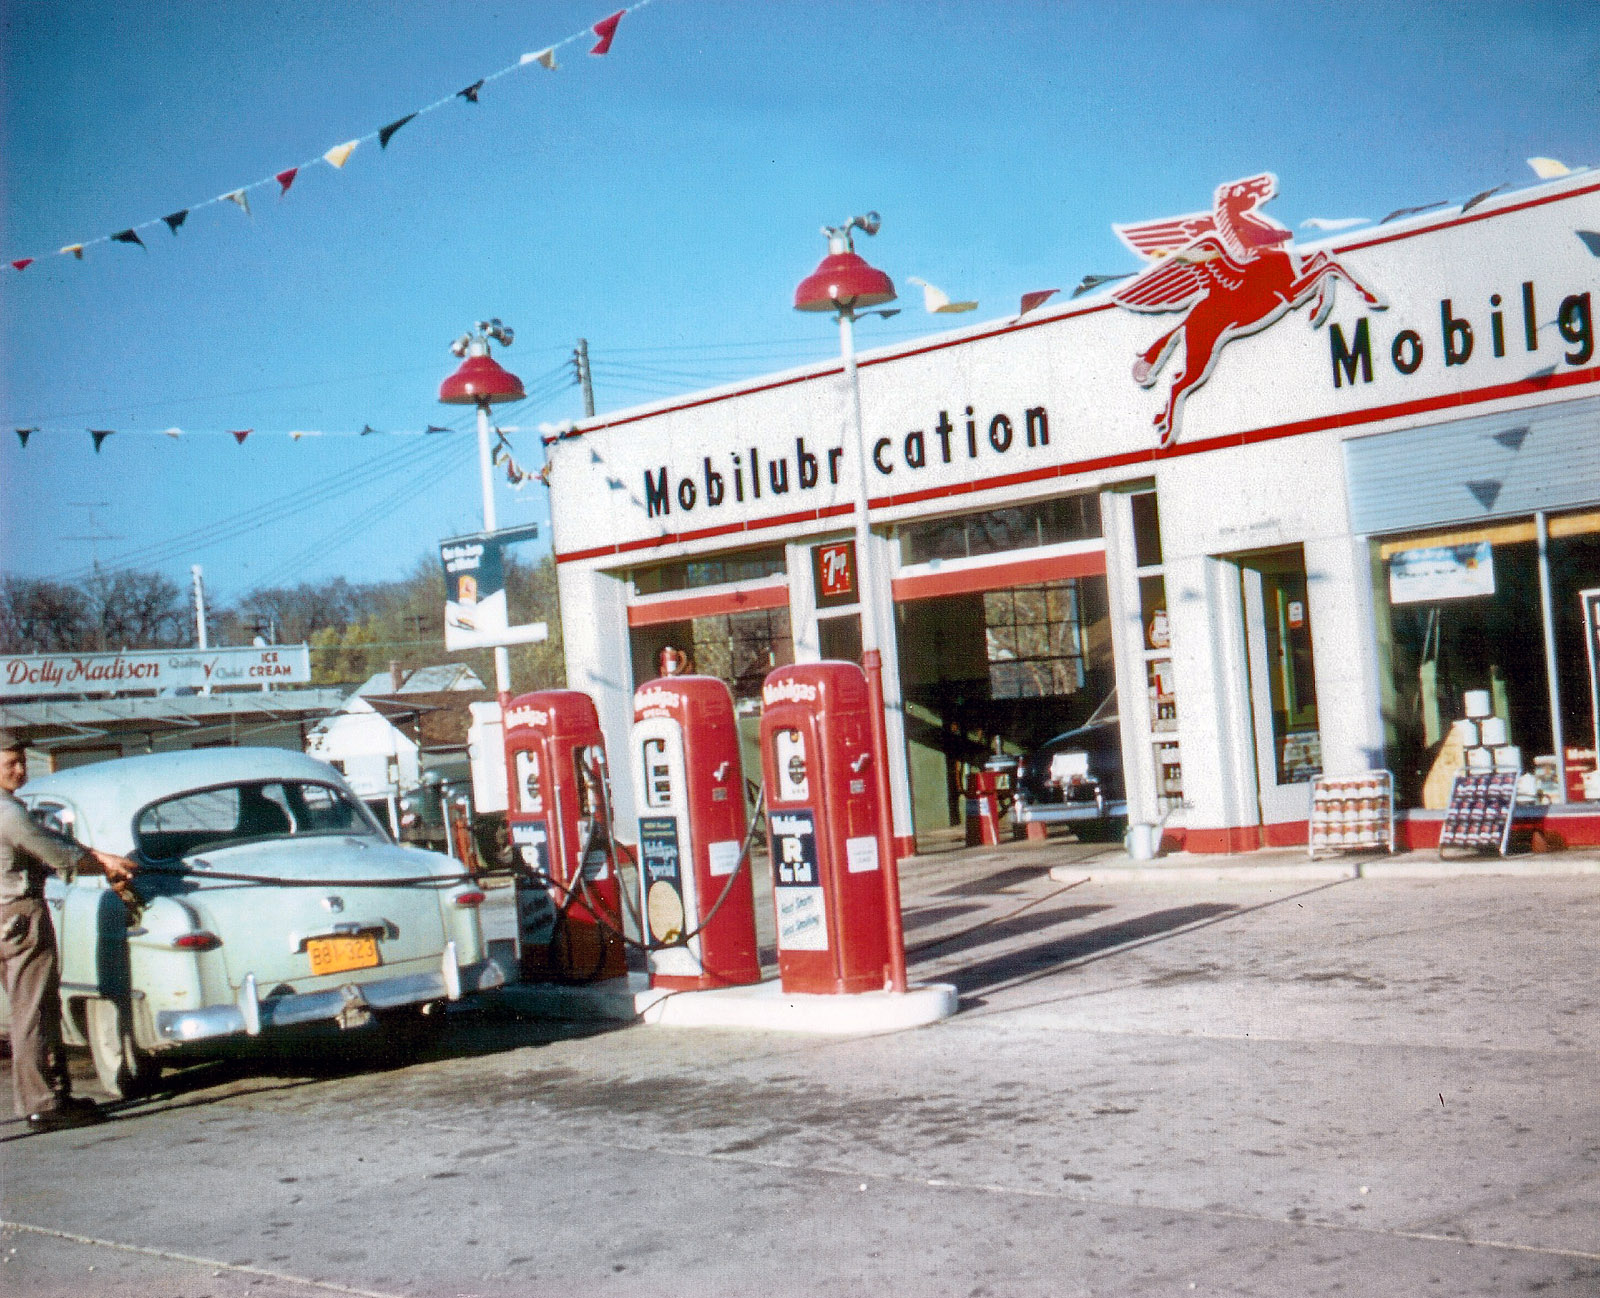 Onalaska, Wisconsin, early 1950s, when full service was the rule. View full size.